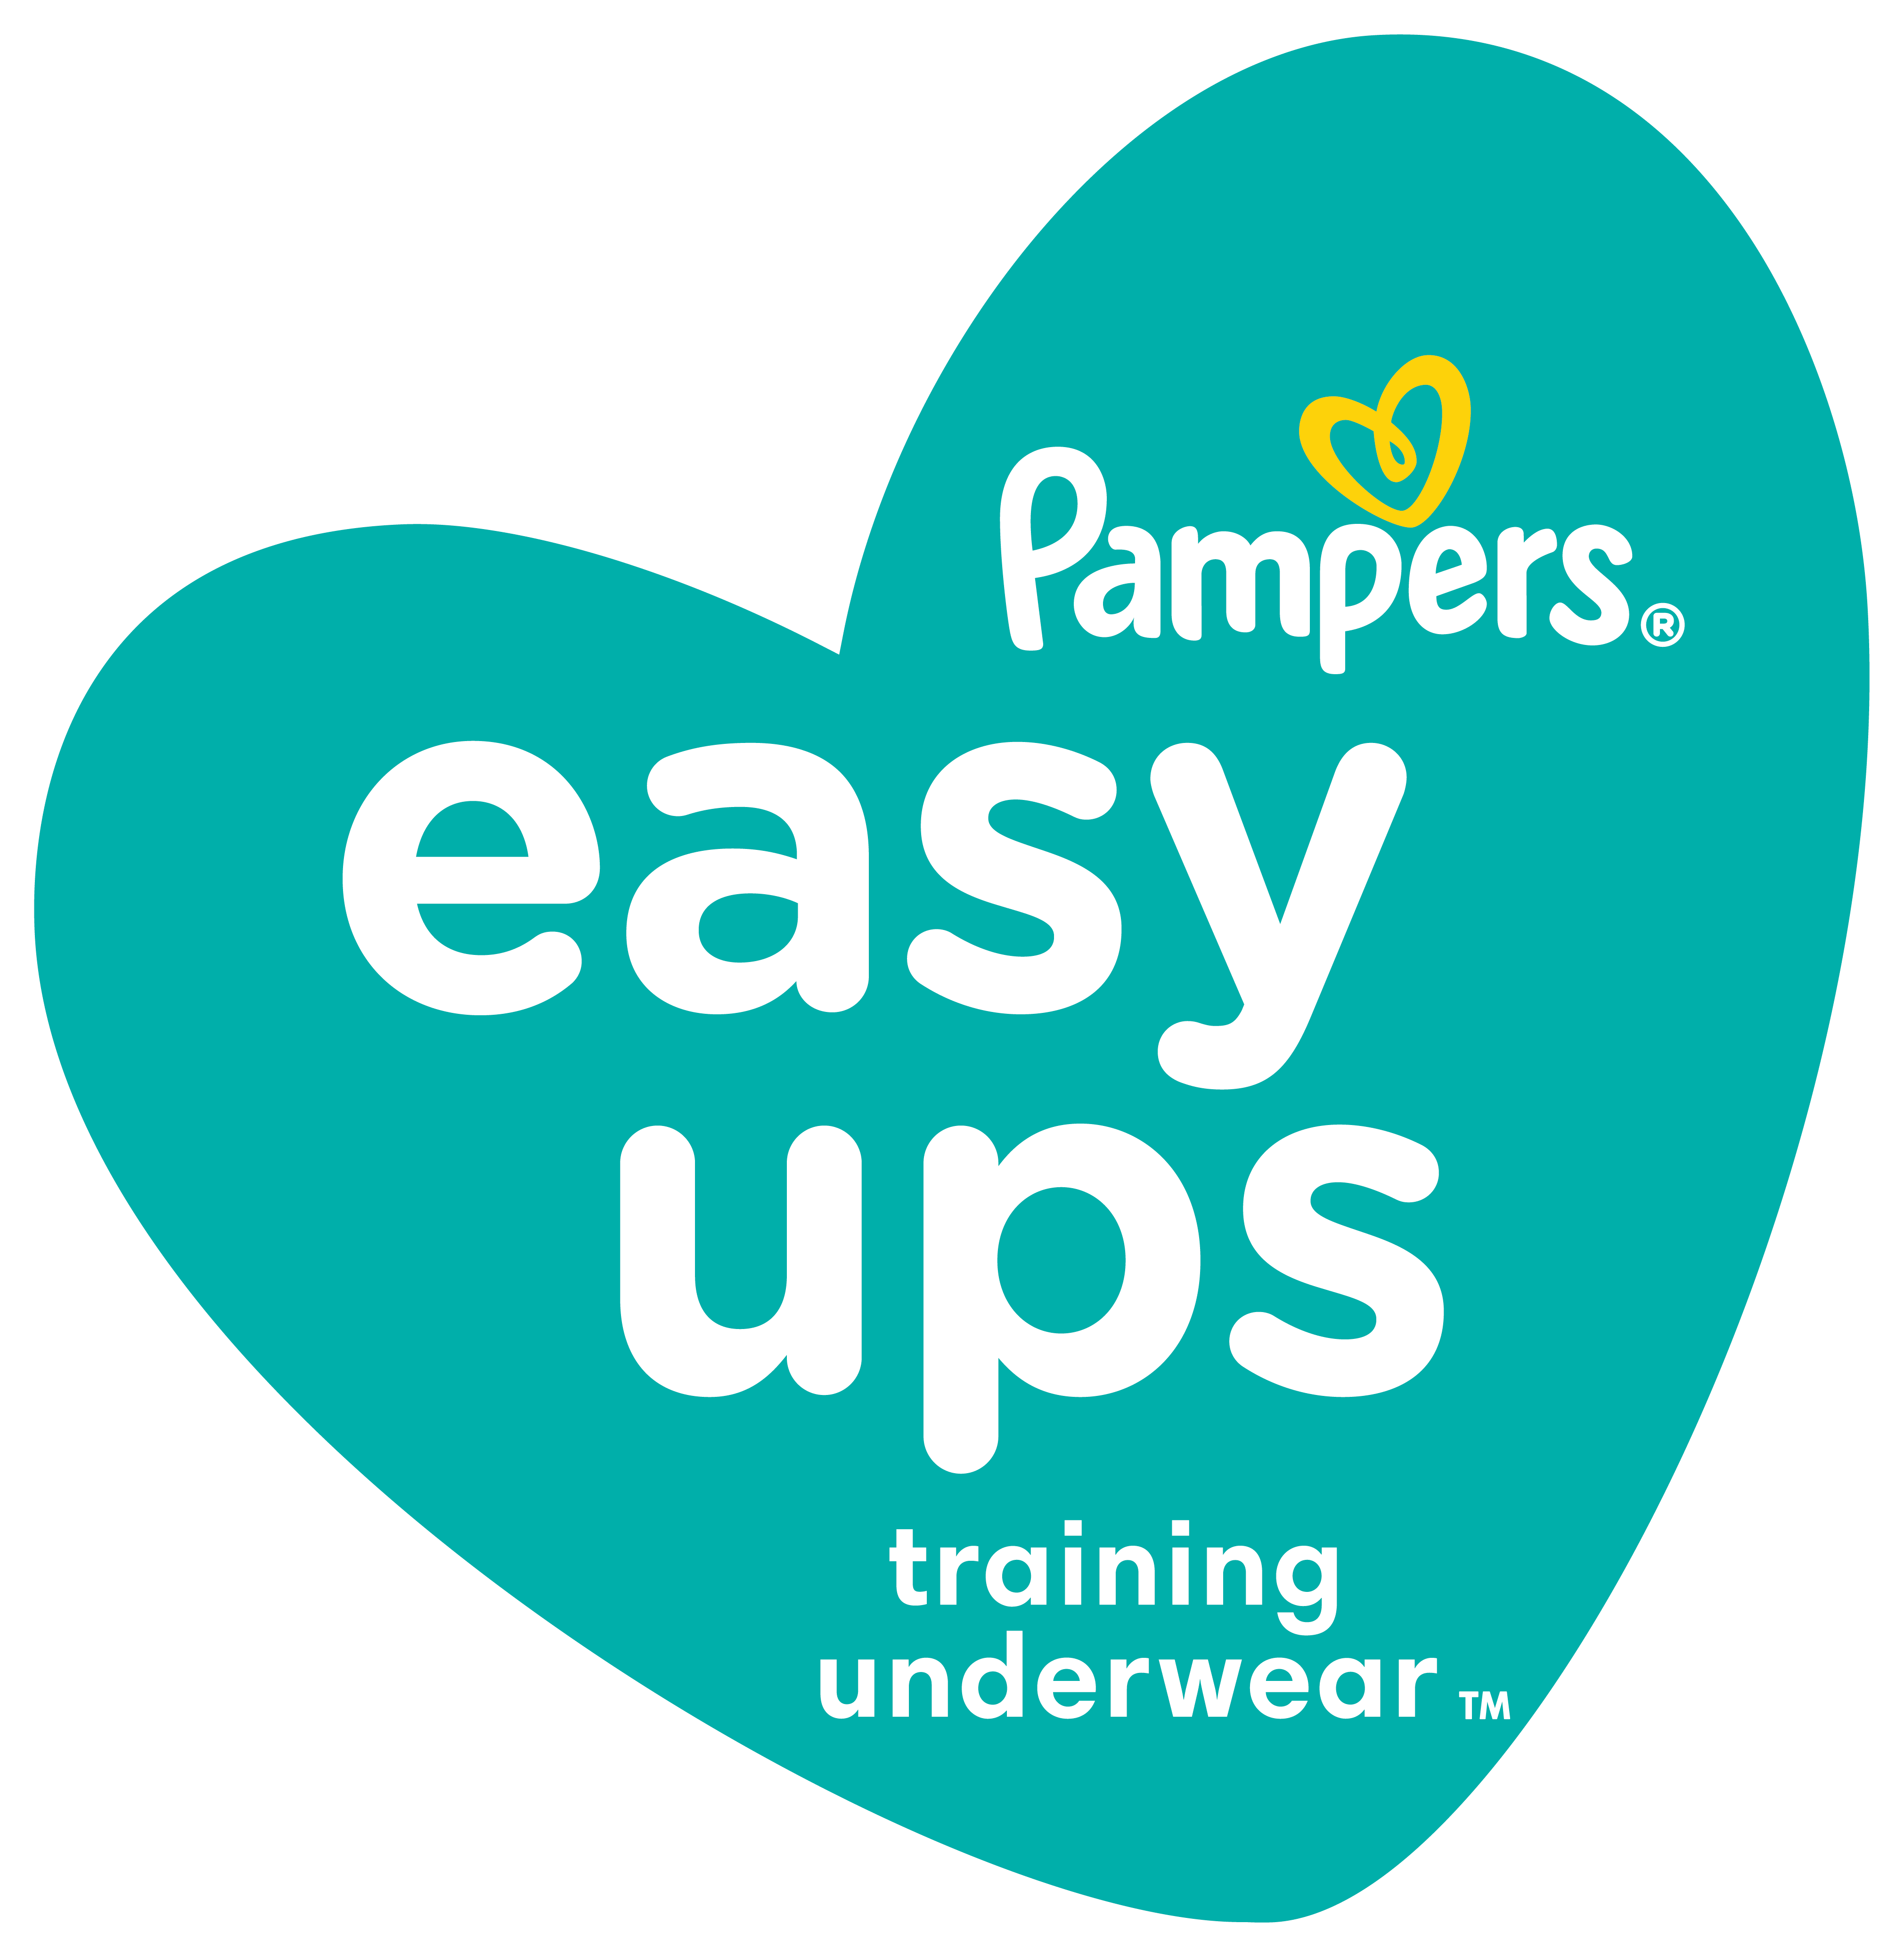 pampers heart logo